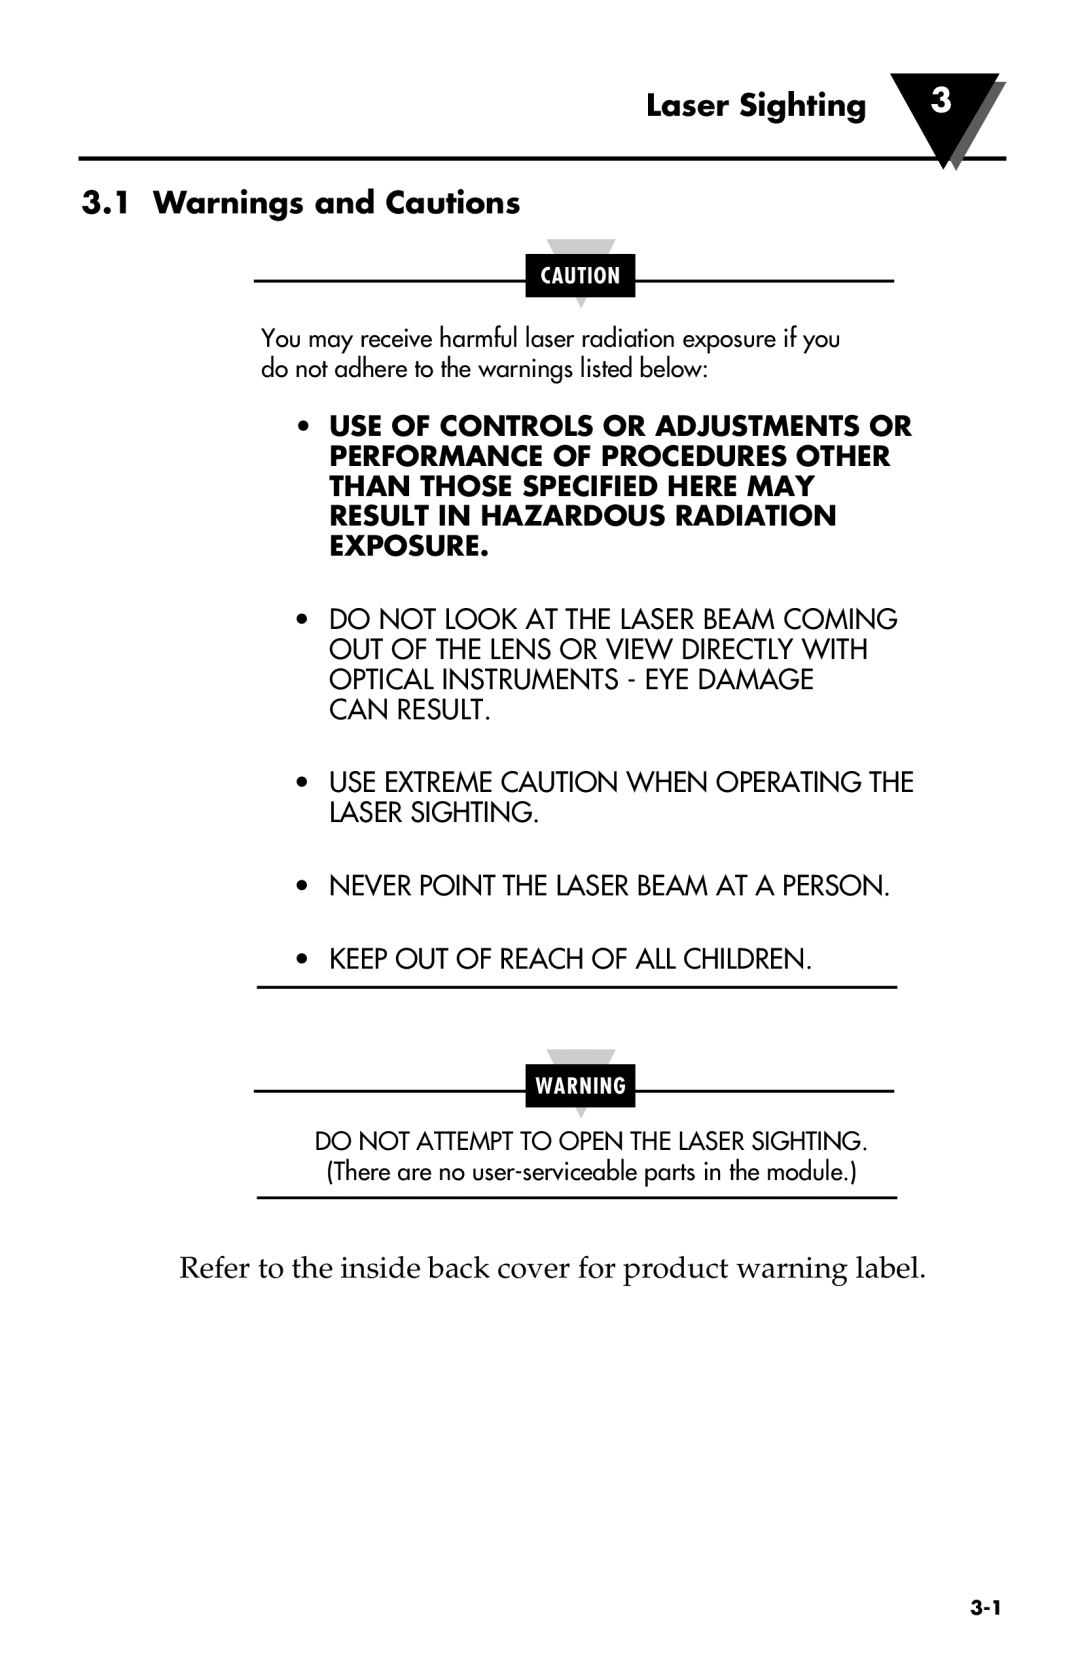 Omega Engineering OS531 Laser Sighting, Warnings and Cautions, Refer to the inside back cover for product warning label 